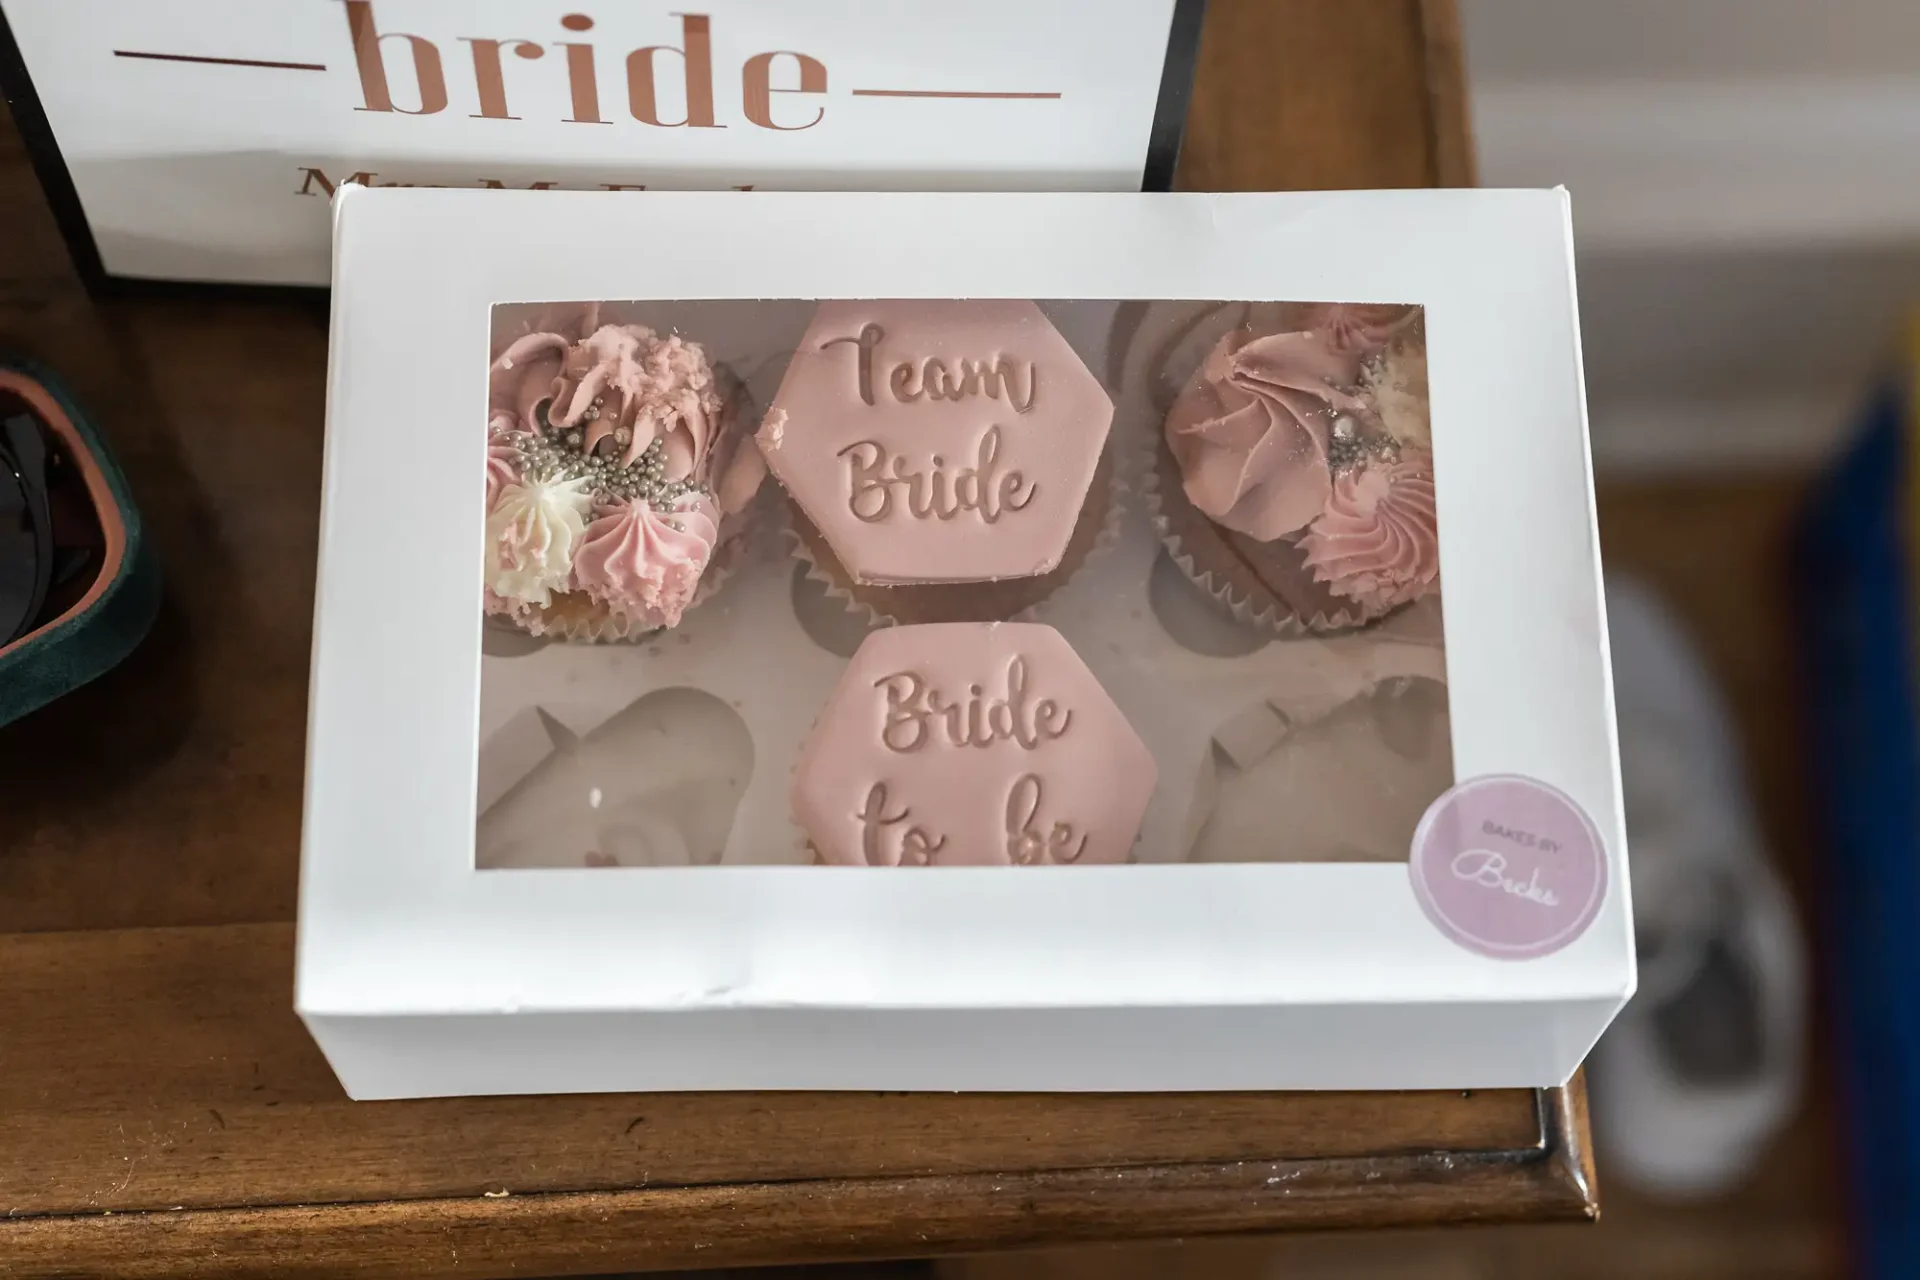 A box of pink and white themed cupcakes with "team bride" and "bride to be" decorations, placed on a wooden surface next to a "bride" sign.